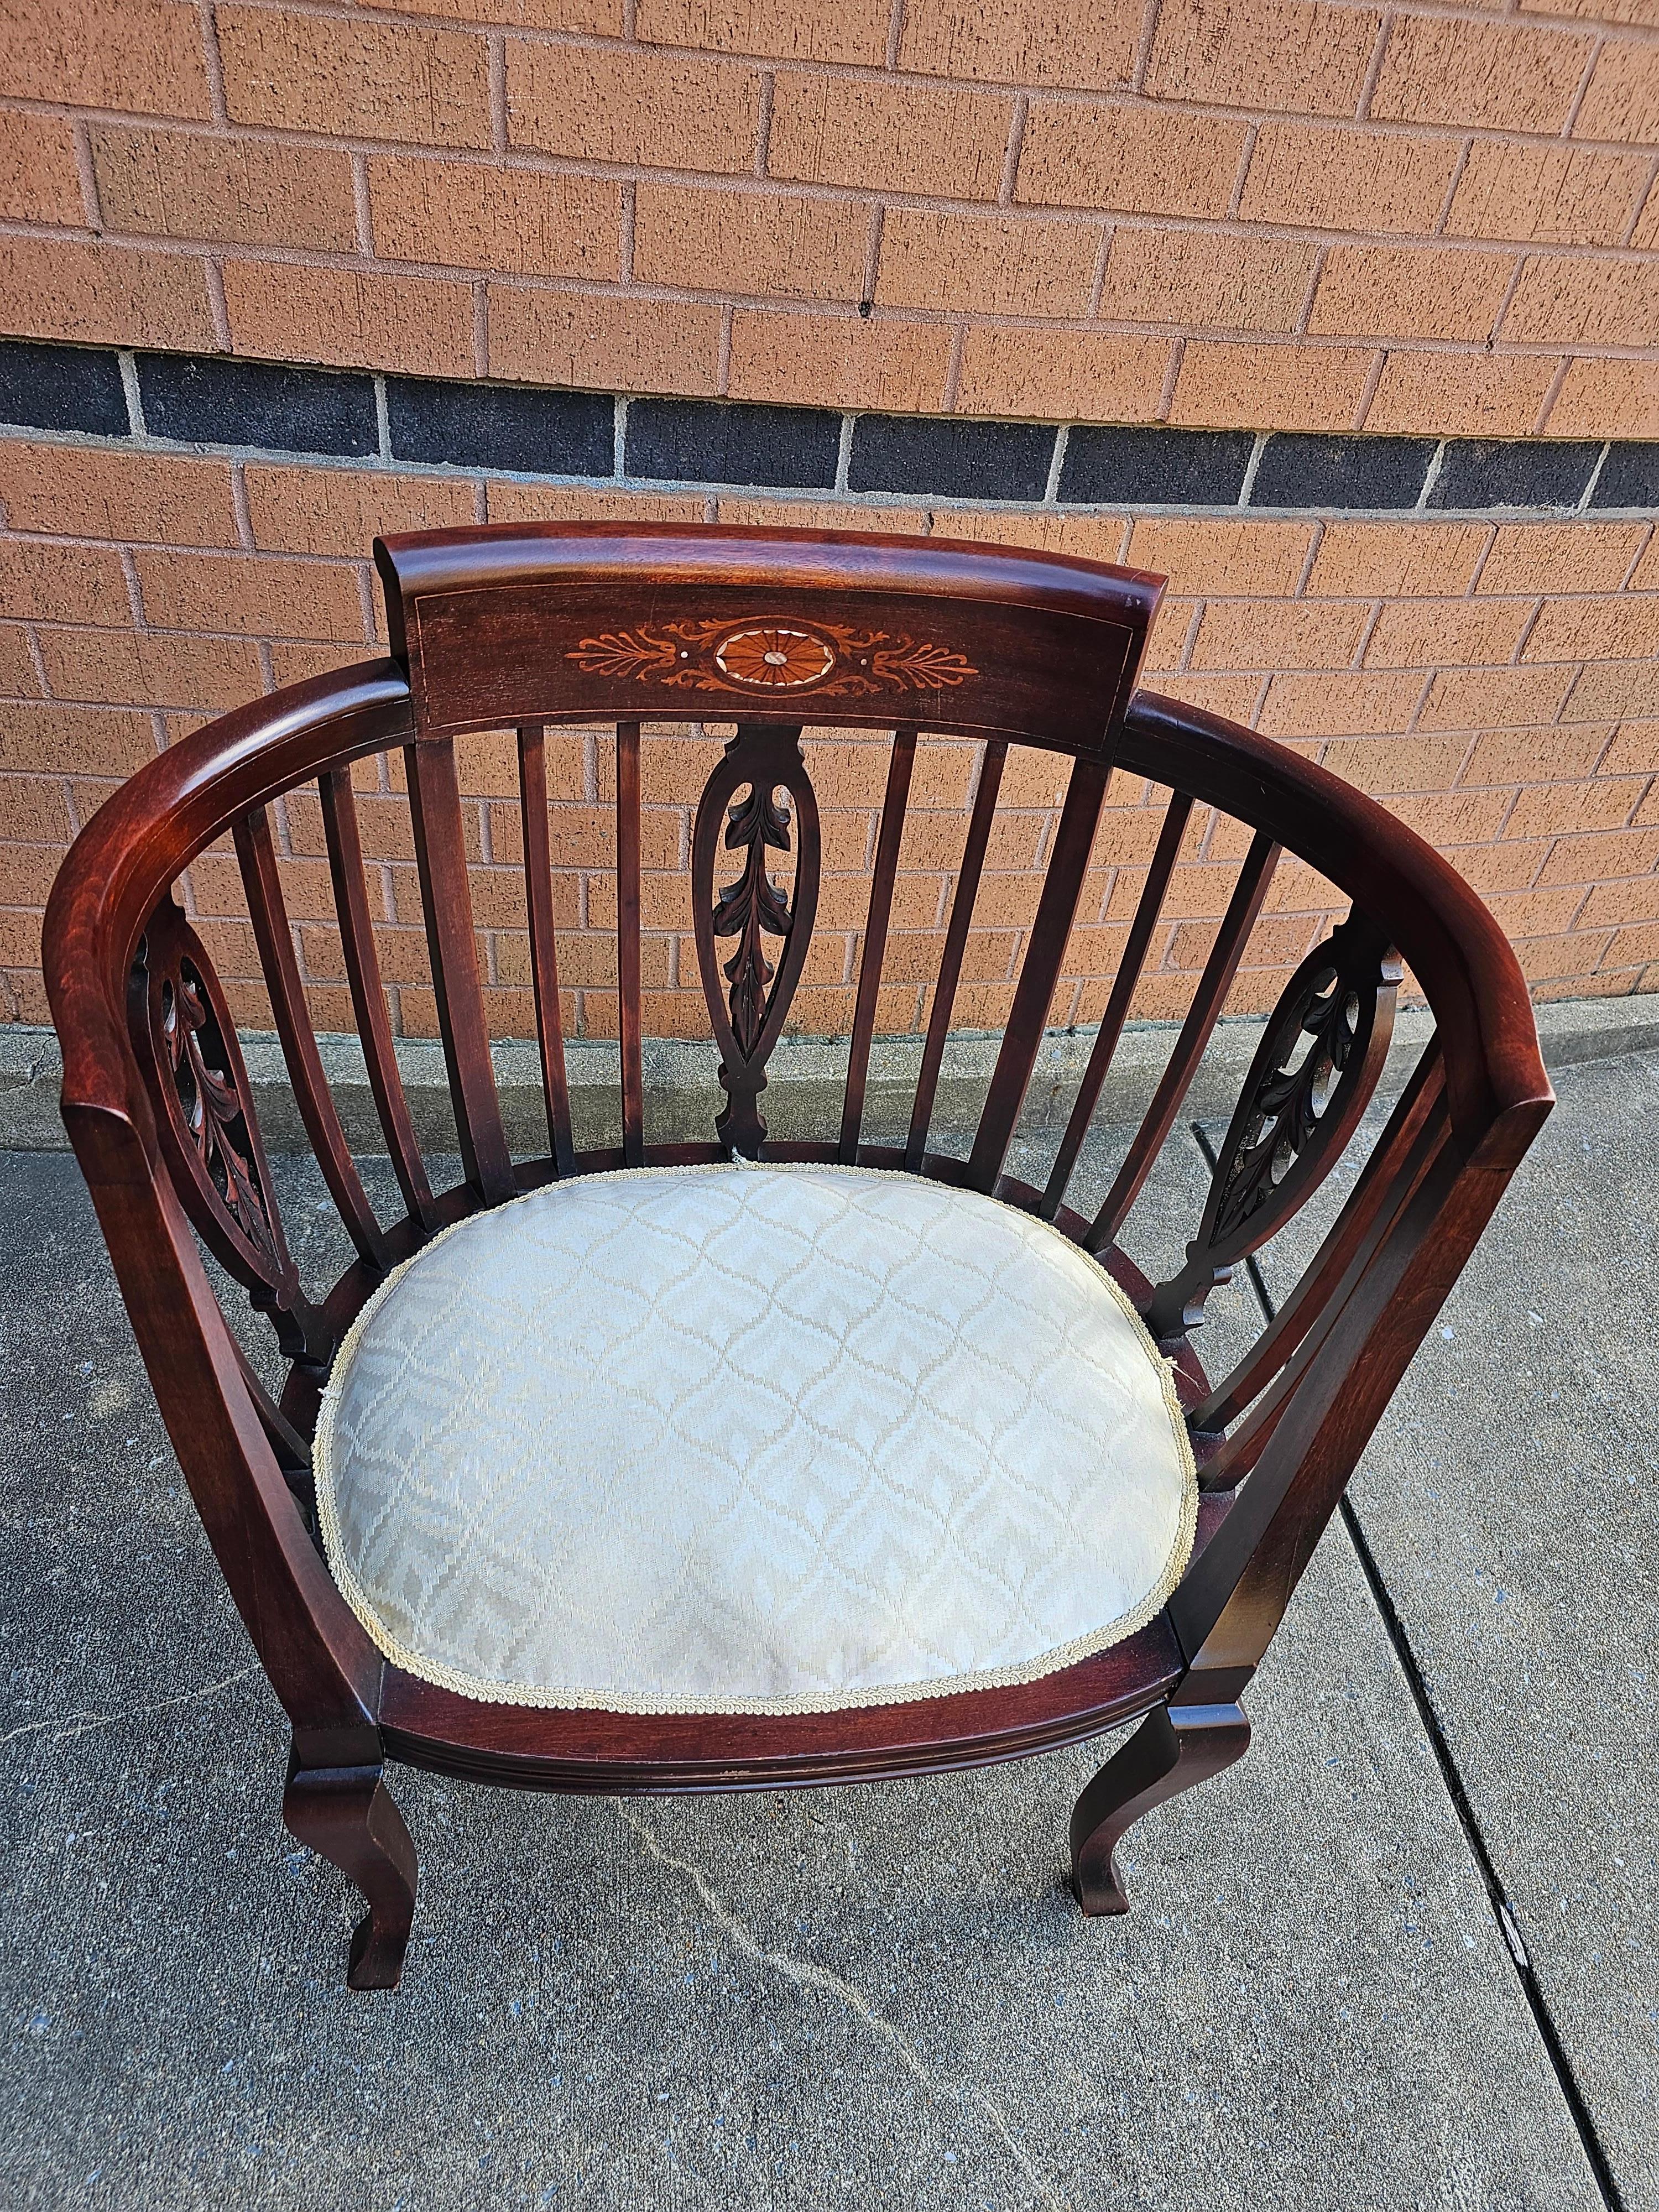 Carved Early 20th Century Edwardian Inlaid Mahogany and Upholstered Seat Barrel Chair For Sale